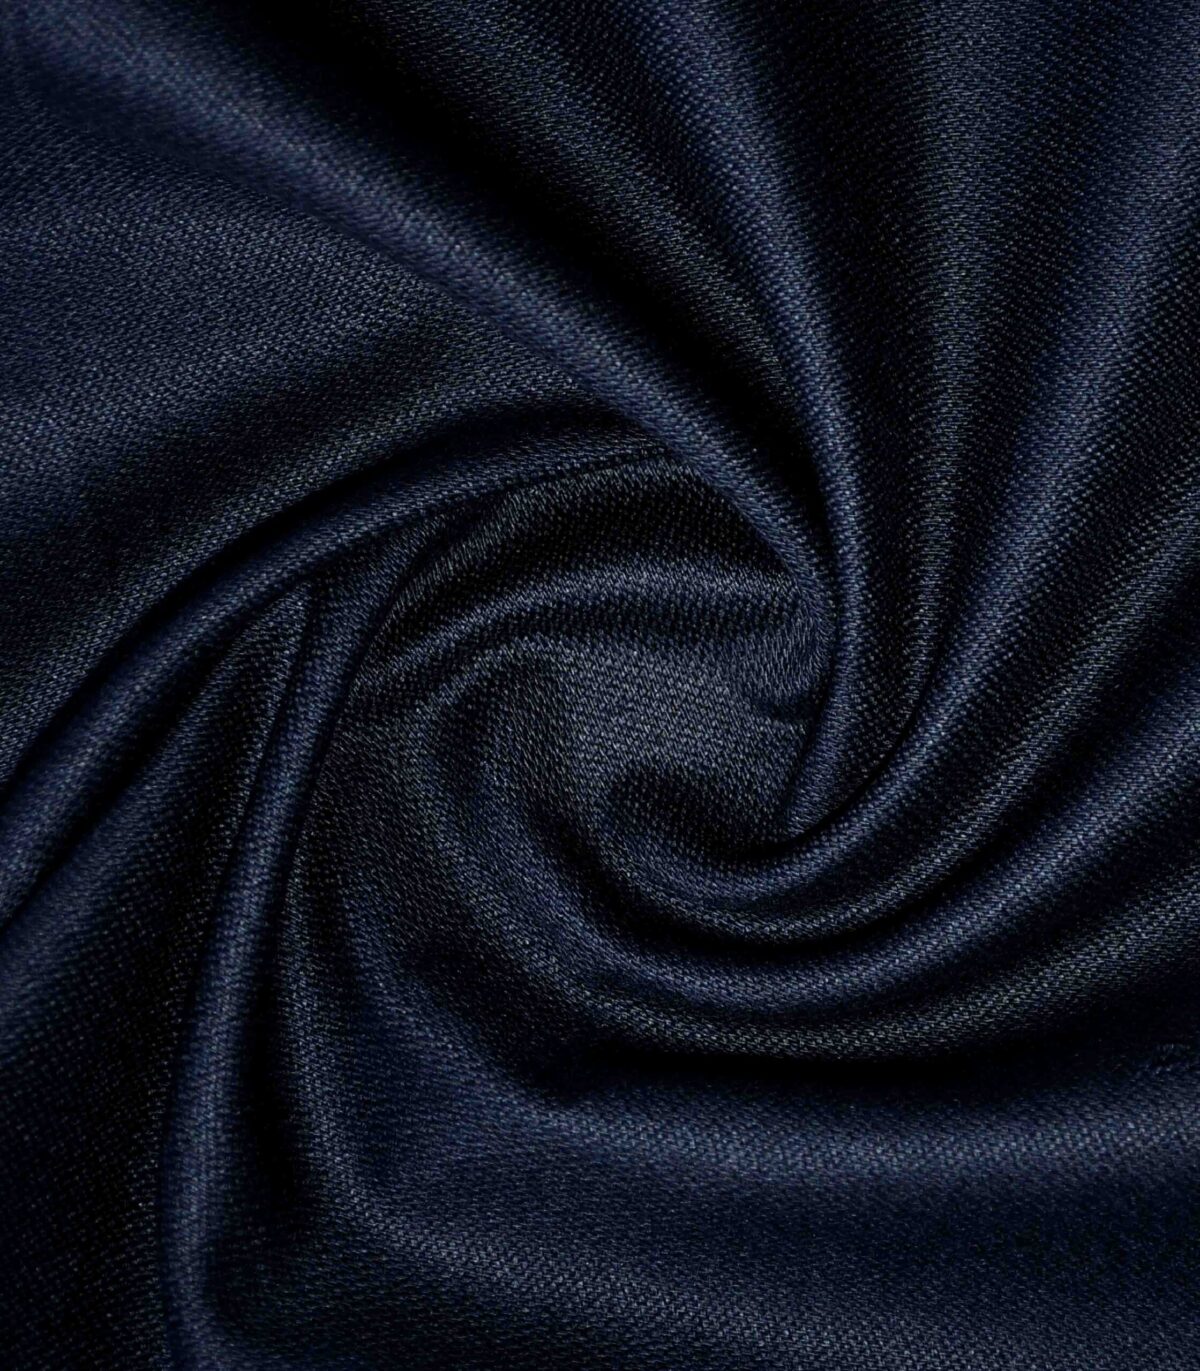 Broken Twill Blue Color Dyed Cotton Fabric